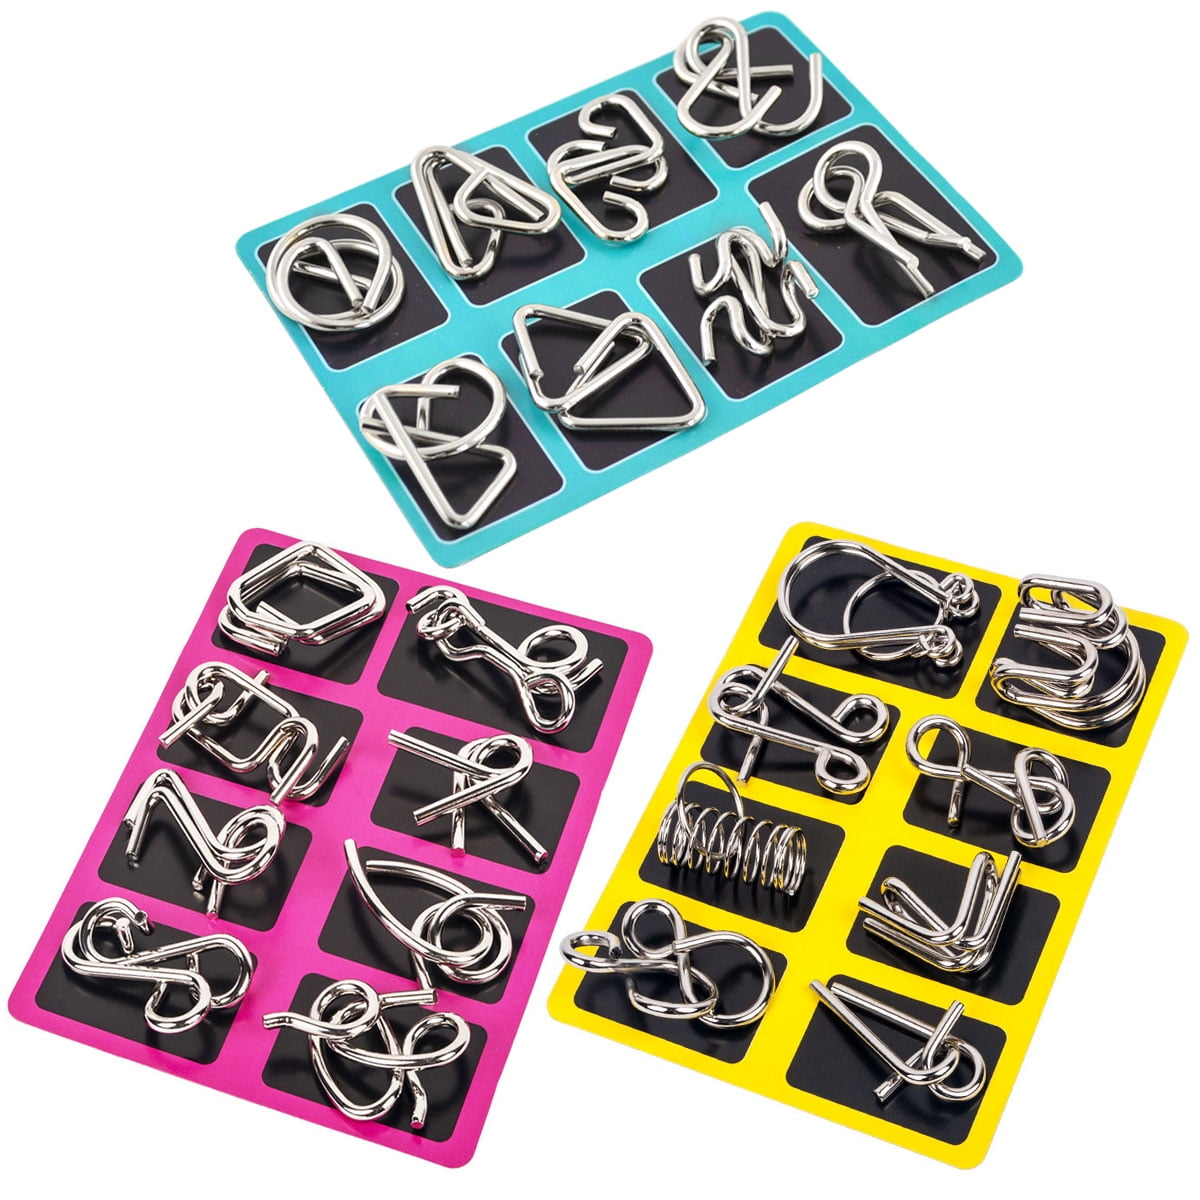 24PCS Metal Wire Puzzle IQ Mind Brain Teaser Puzzles Game for Adults Kids 